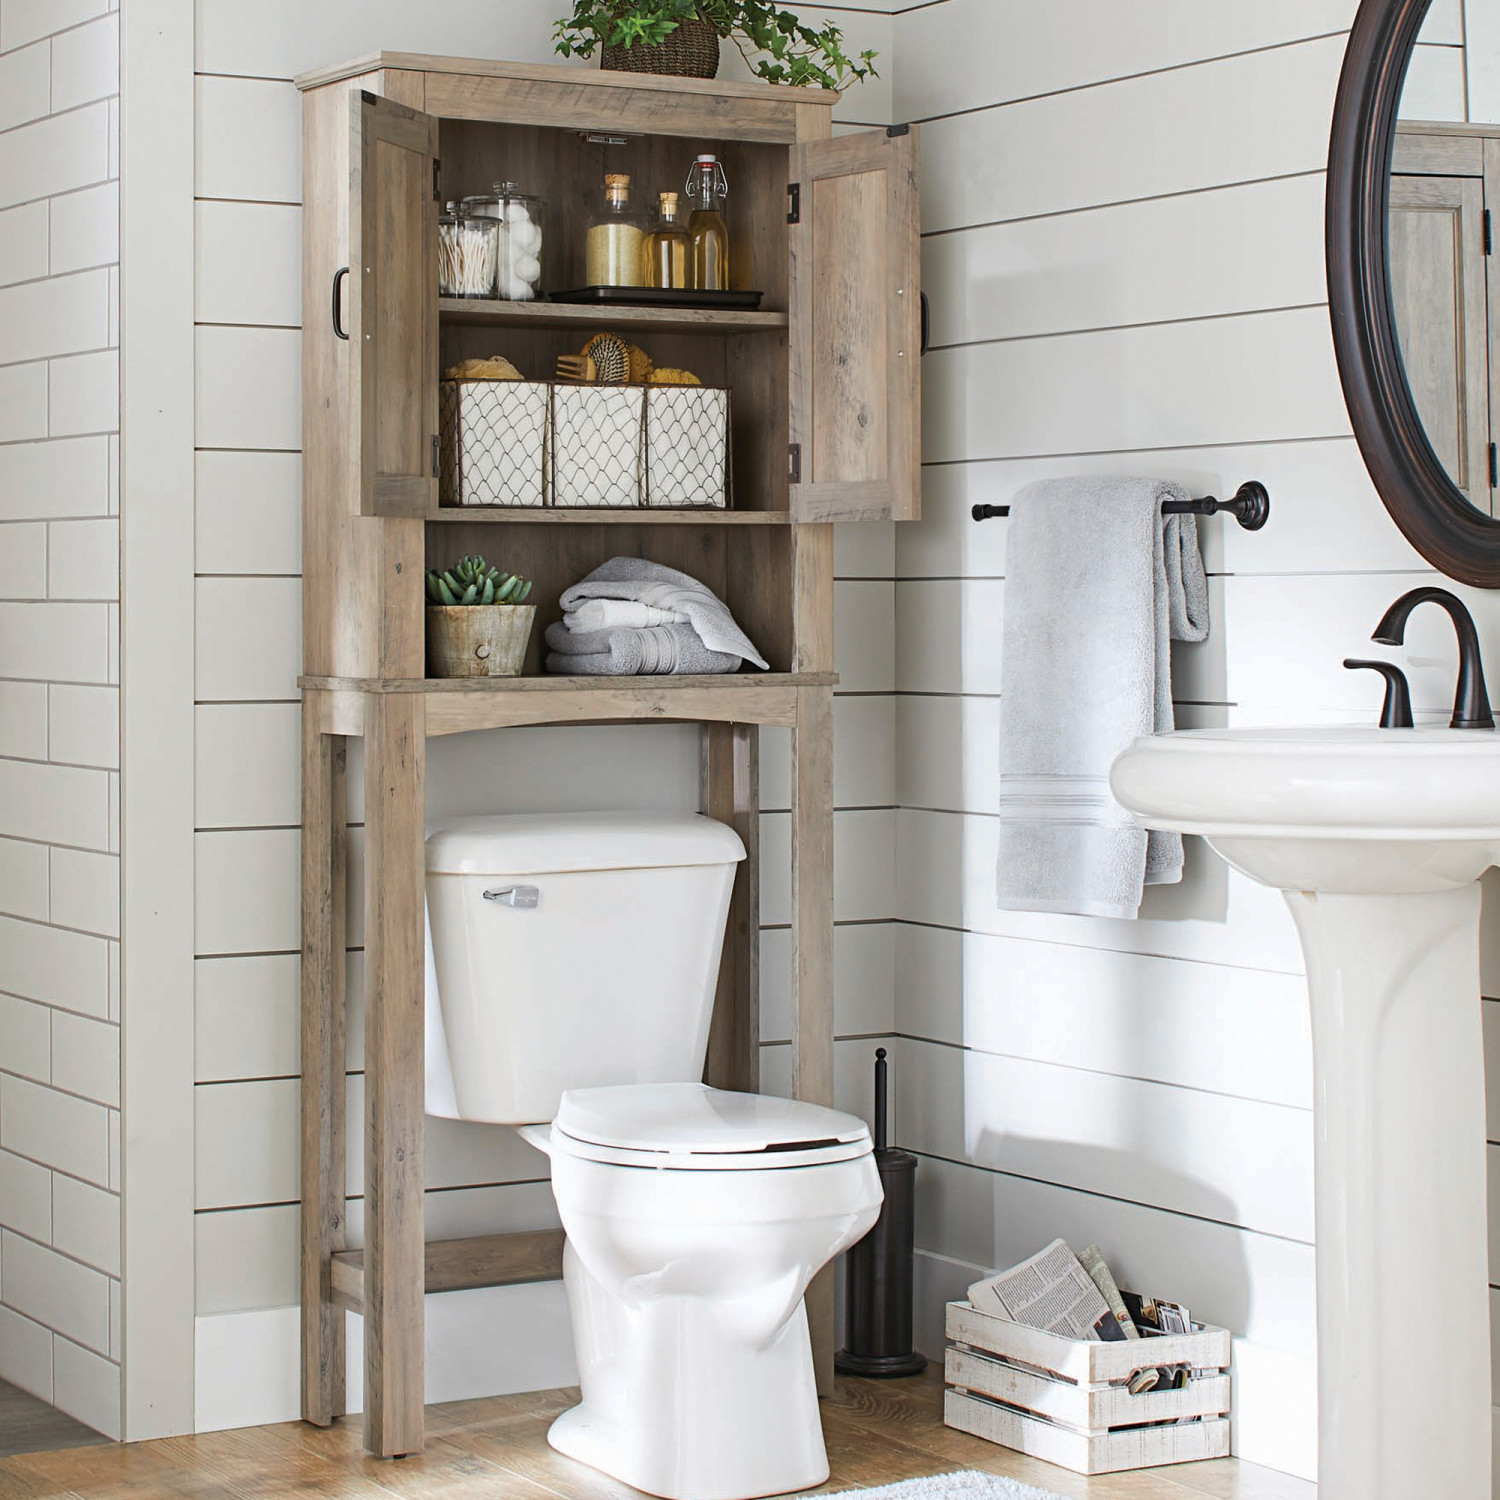 Bathroom Cabinets Over The Toilet
 Over The Toilet Storage Cabinet Organizer With Shelves